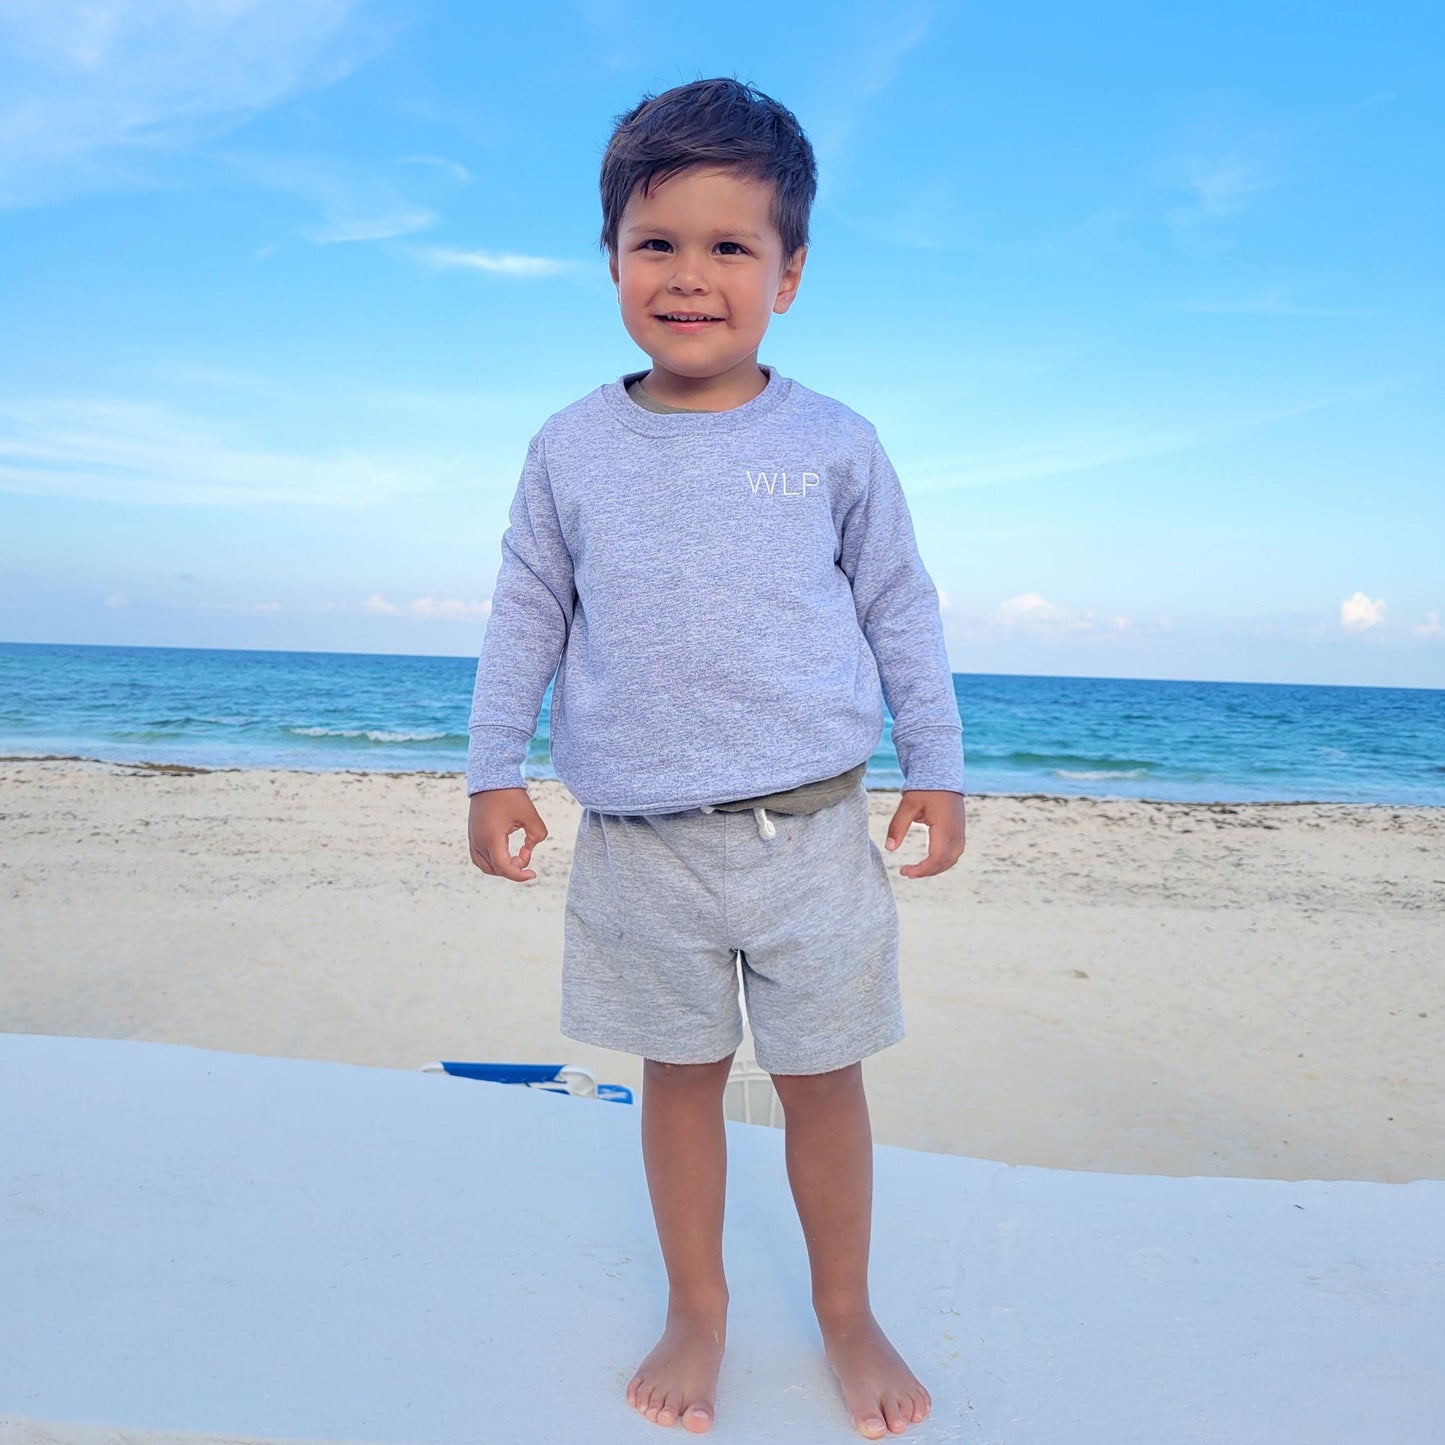 little boy at the beach wearing crewneck with initials on left chest